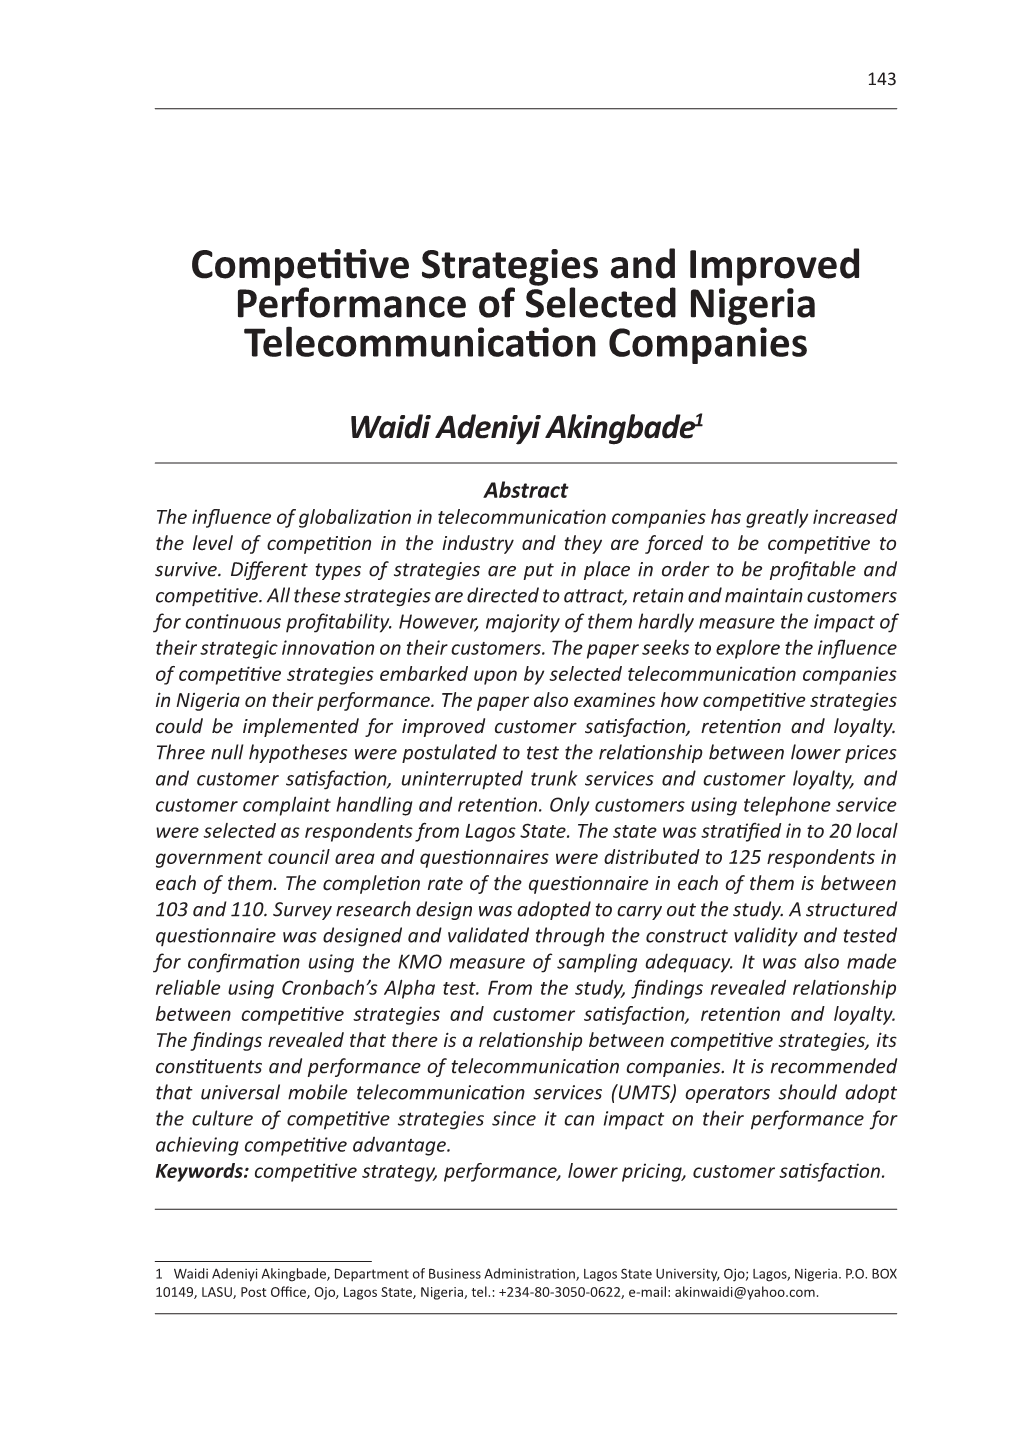 Competitive Strategies and Improved Performance of Selected Nigeria Telecommunication Companies